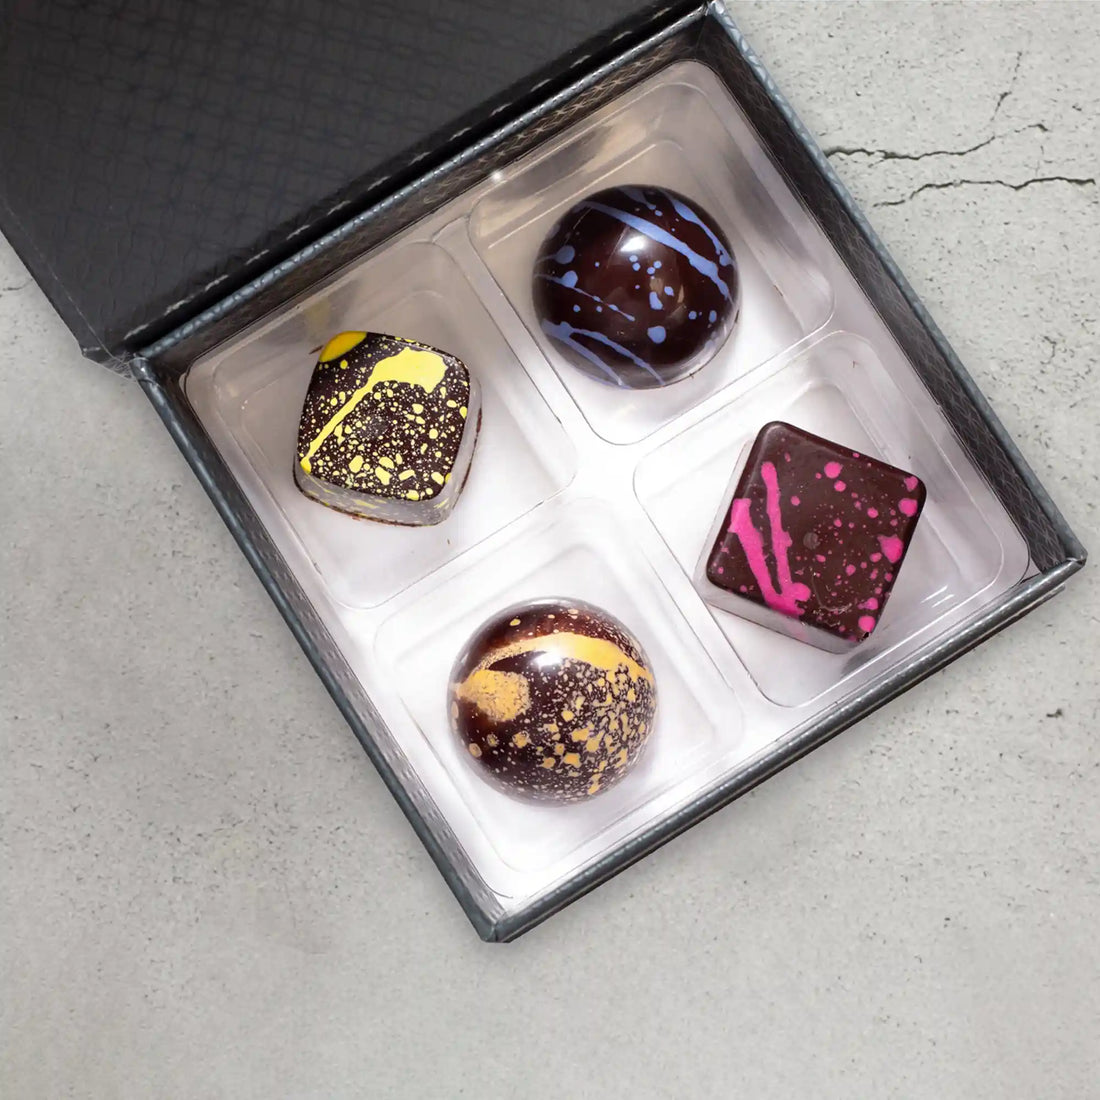 4-piece Elite Collection gift box with 4 dark chocolate bonbons splattered with yellow, orange, purple, and pink